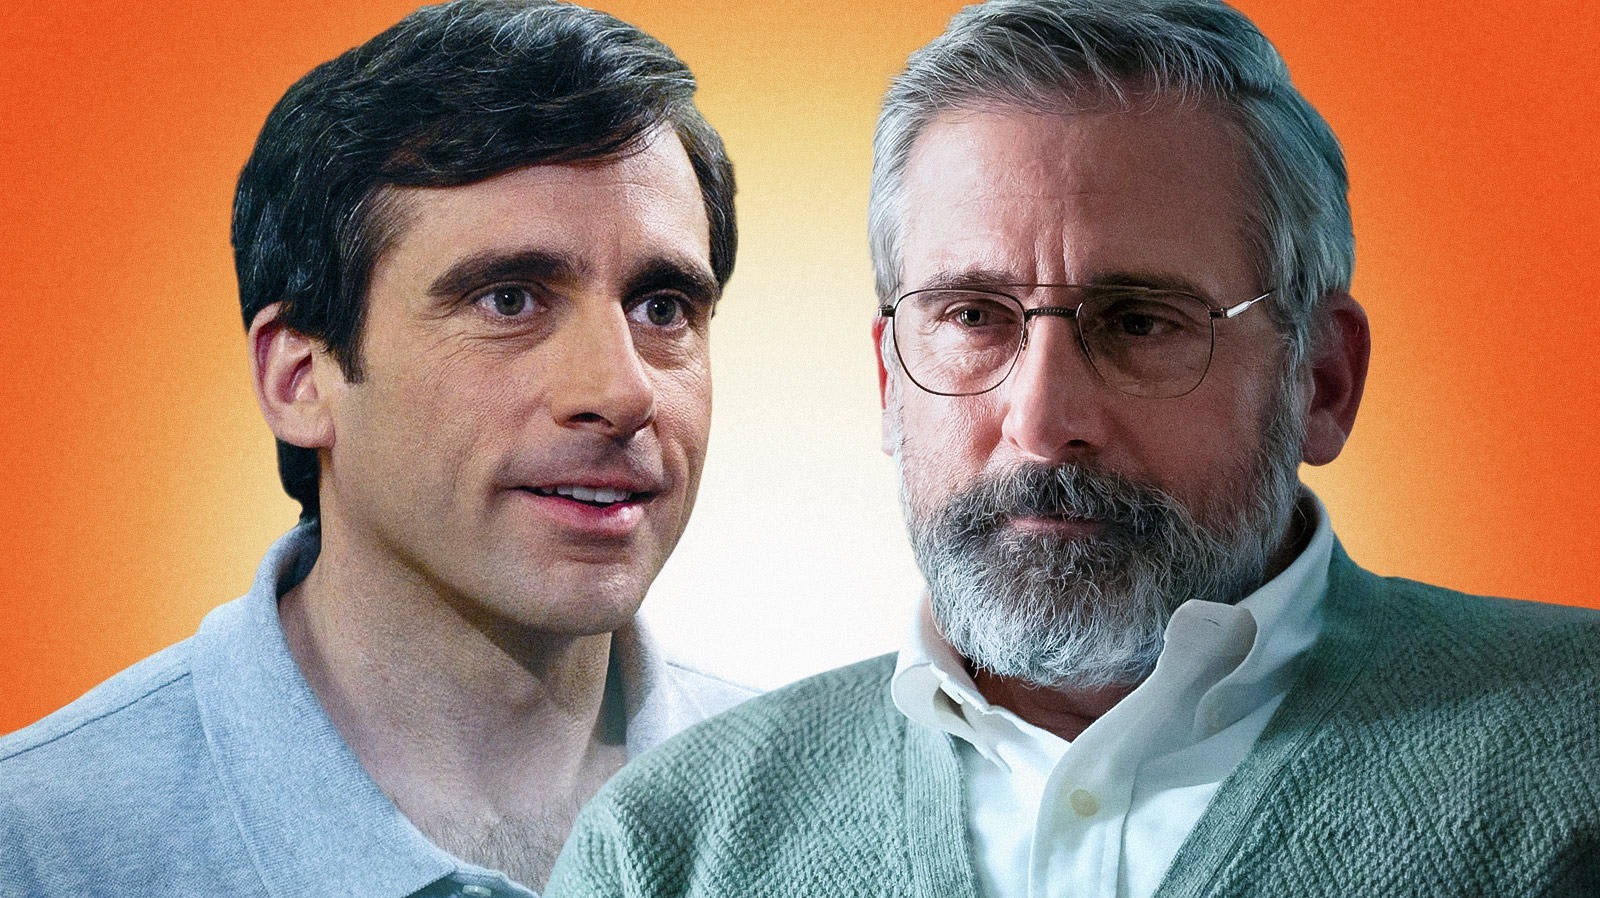 What The 40-Year-Old Virgin Cast Looks Like Today